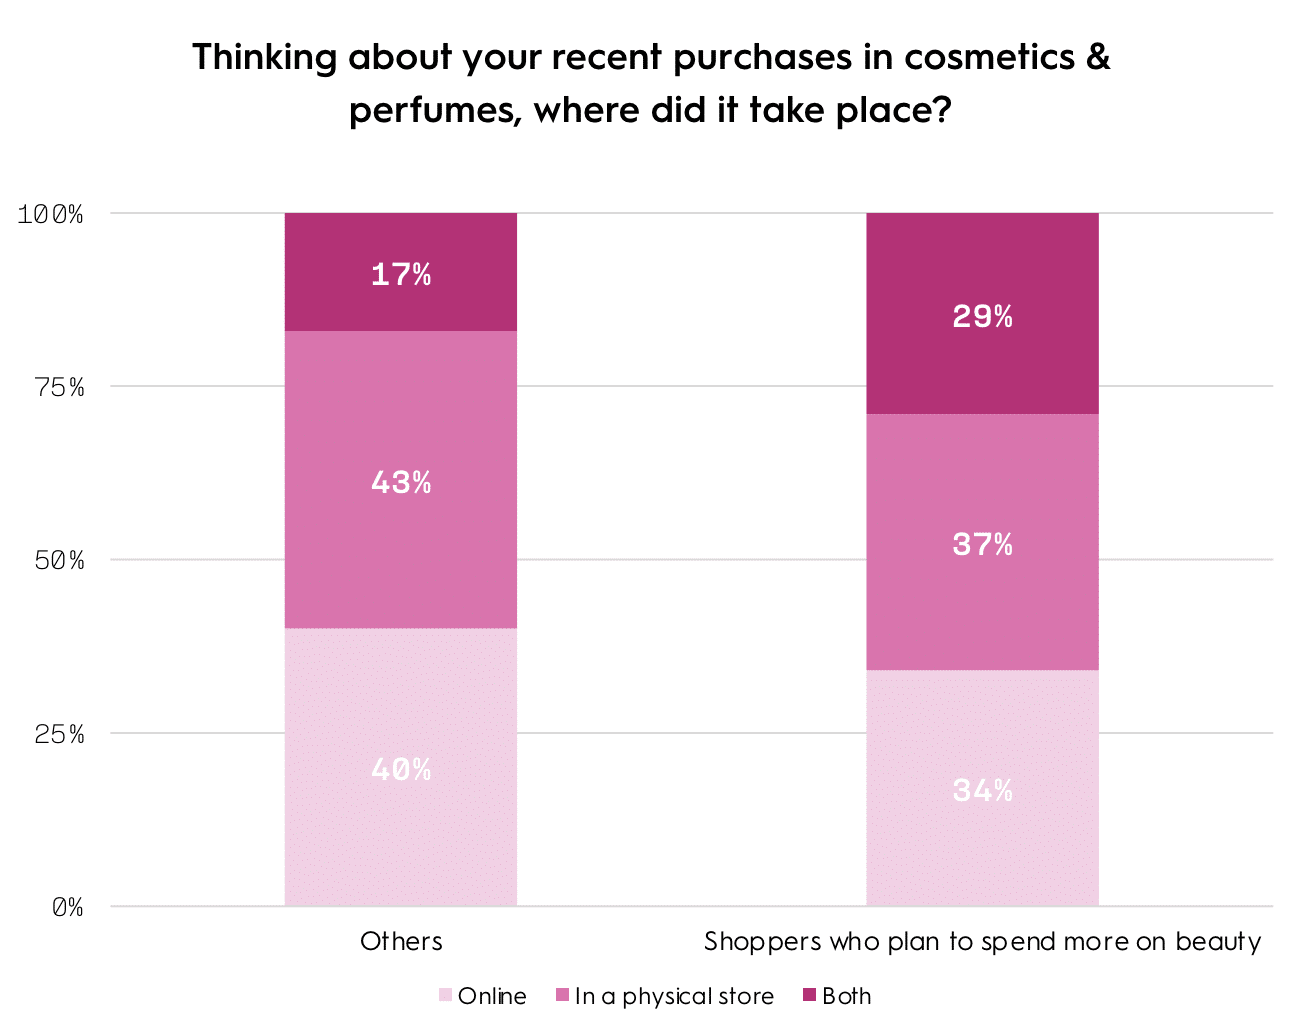 Thinking about your recent cosmetics and perfumes purchases, where did it take place?